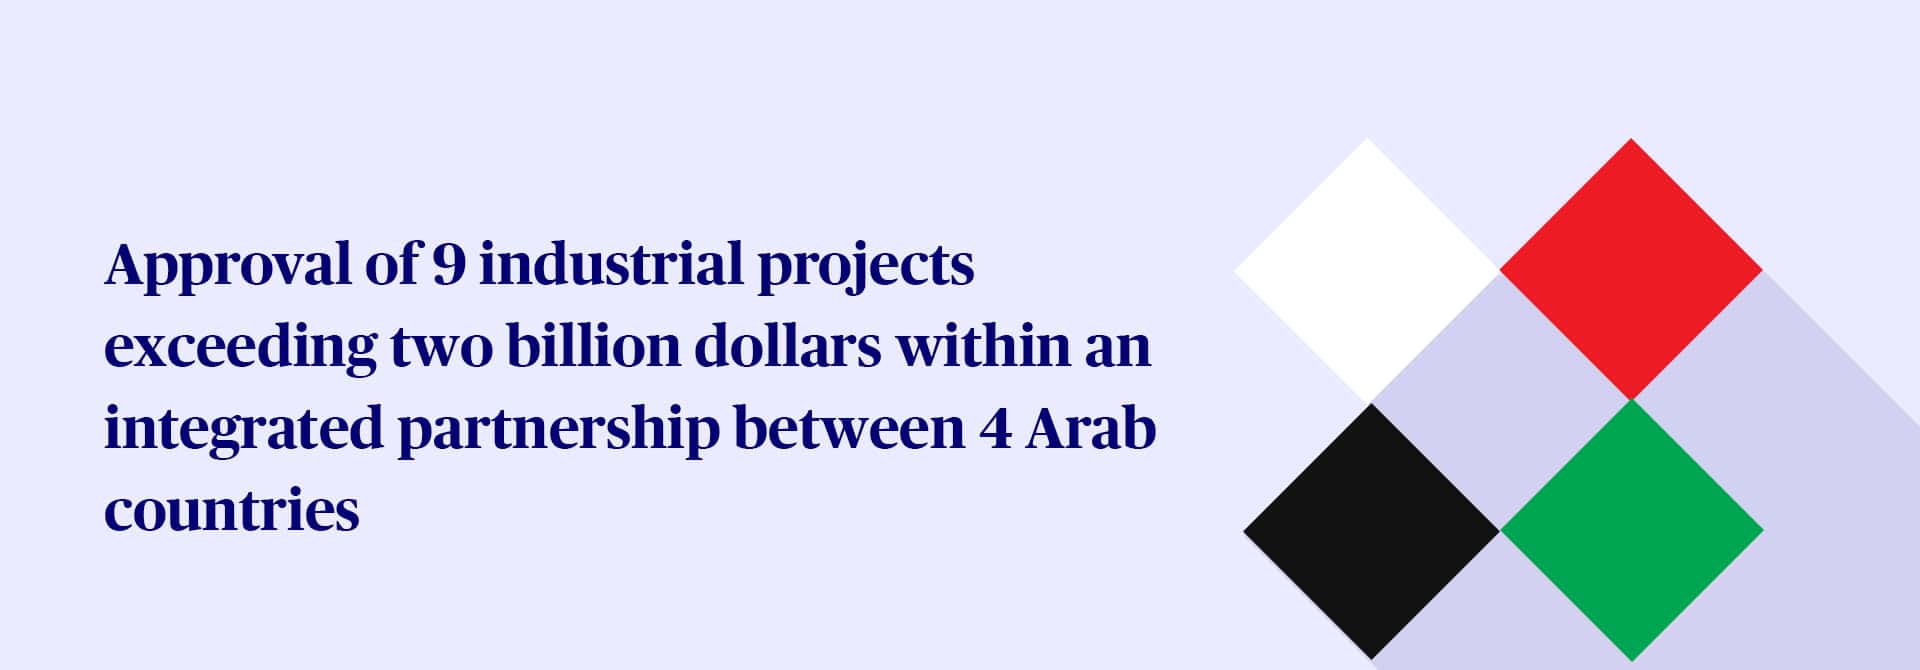 Approval of 9 industrial projects exceeding two billion dollars within an integrated partnership between 4 Arab countries